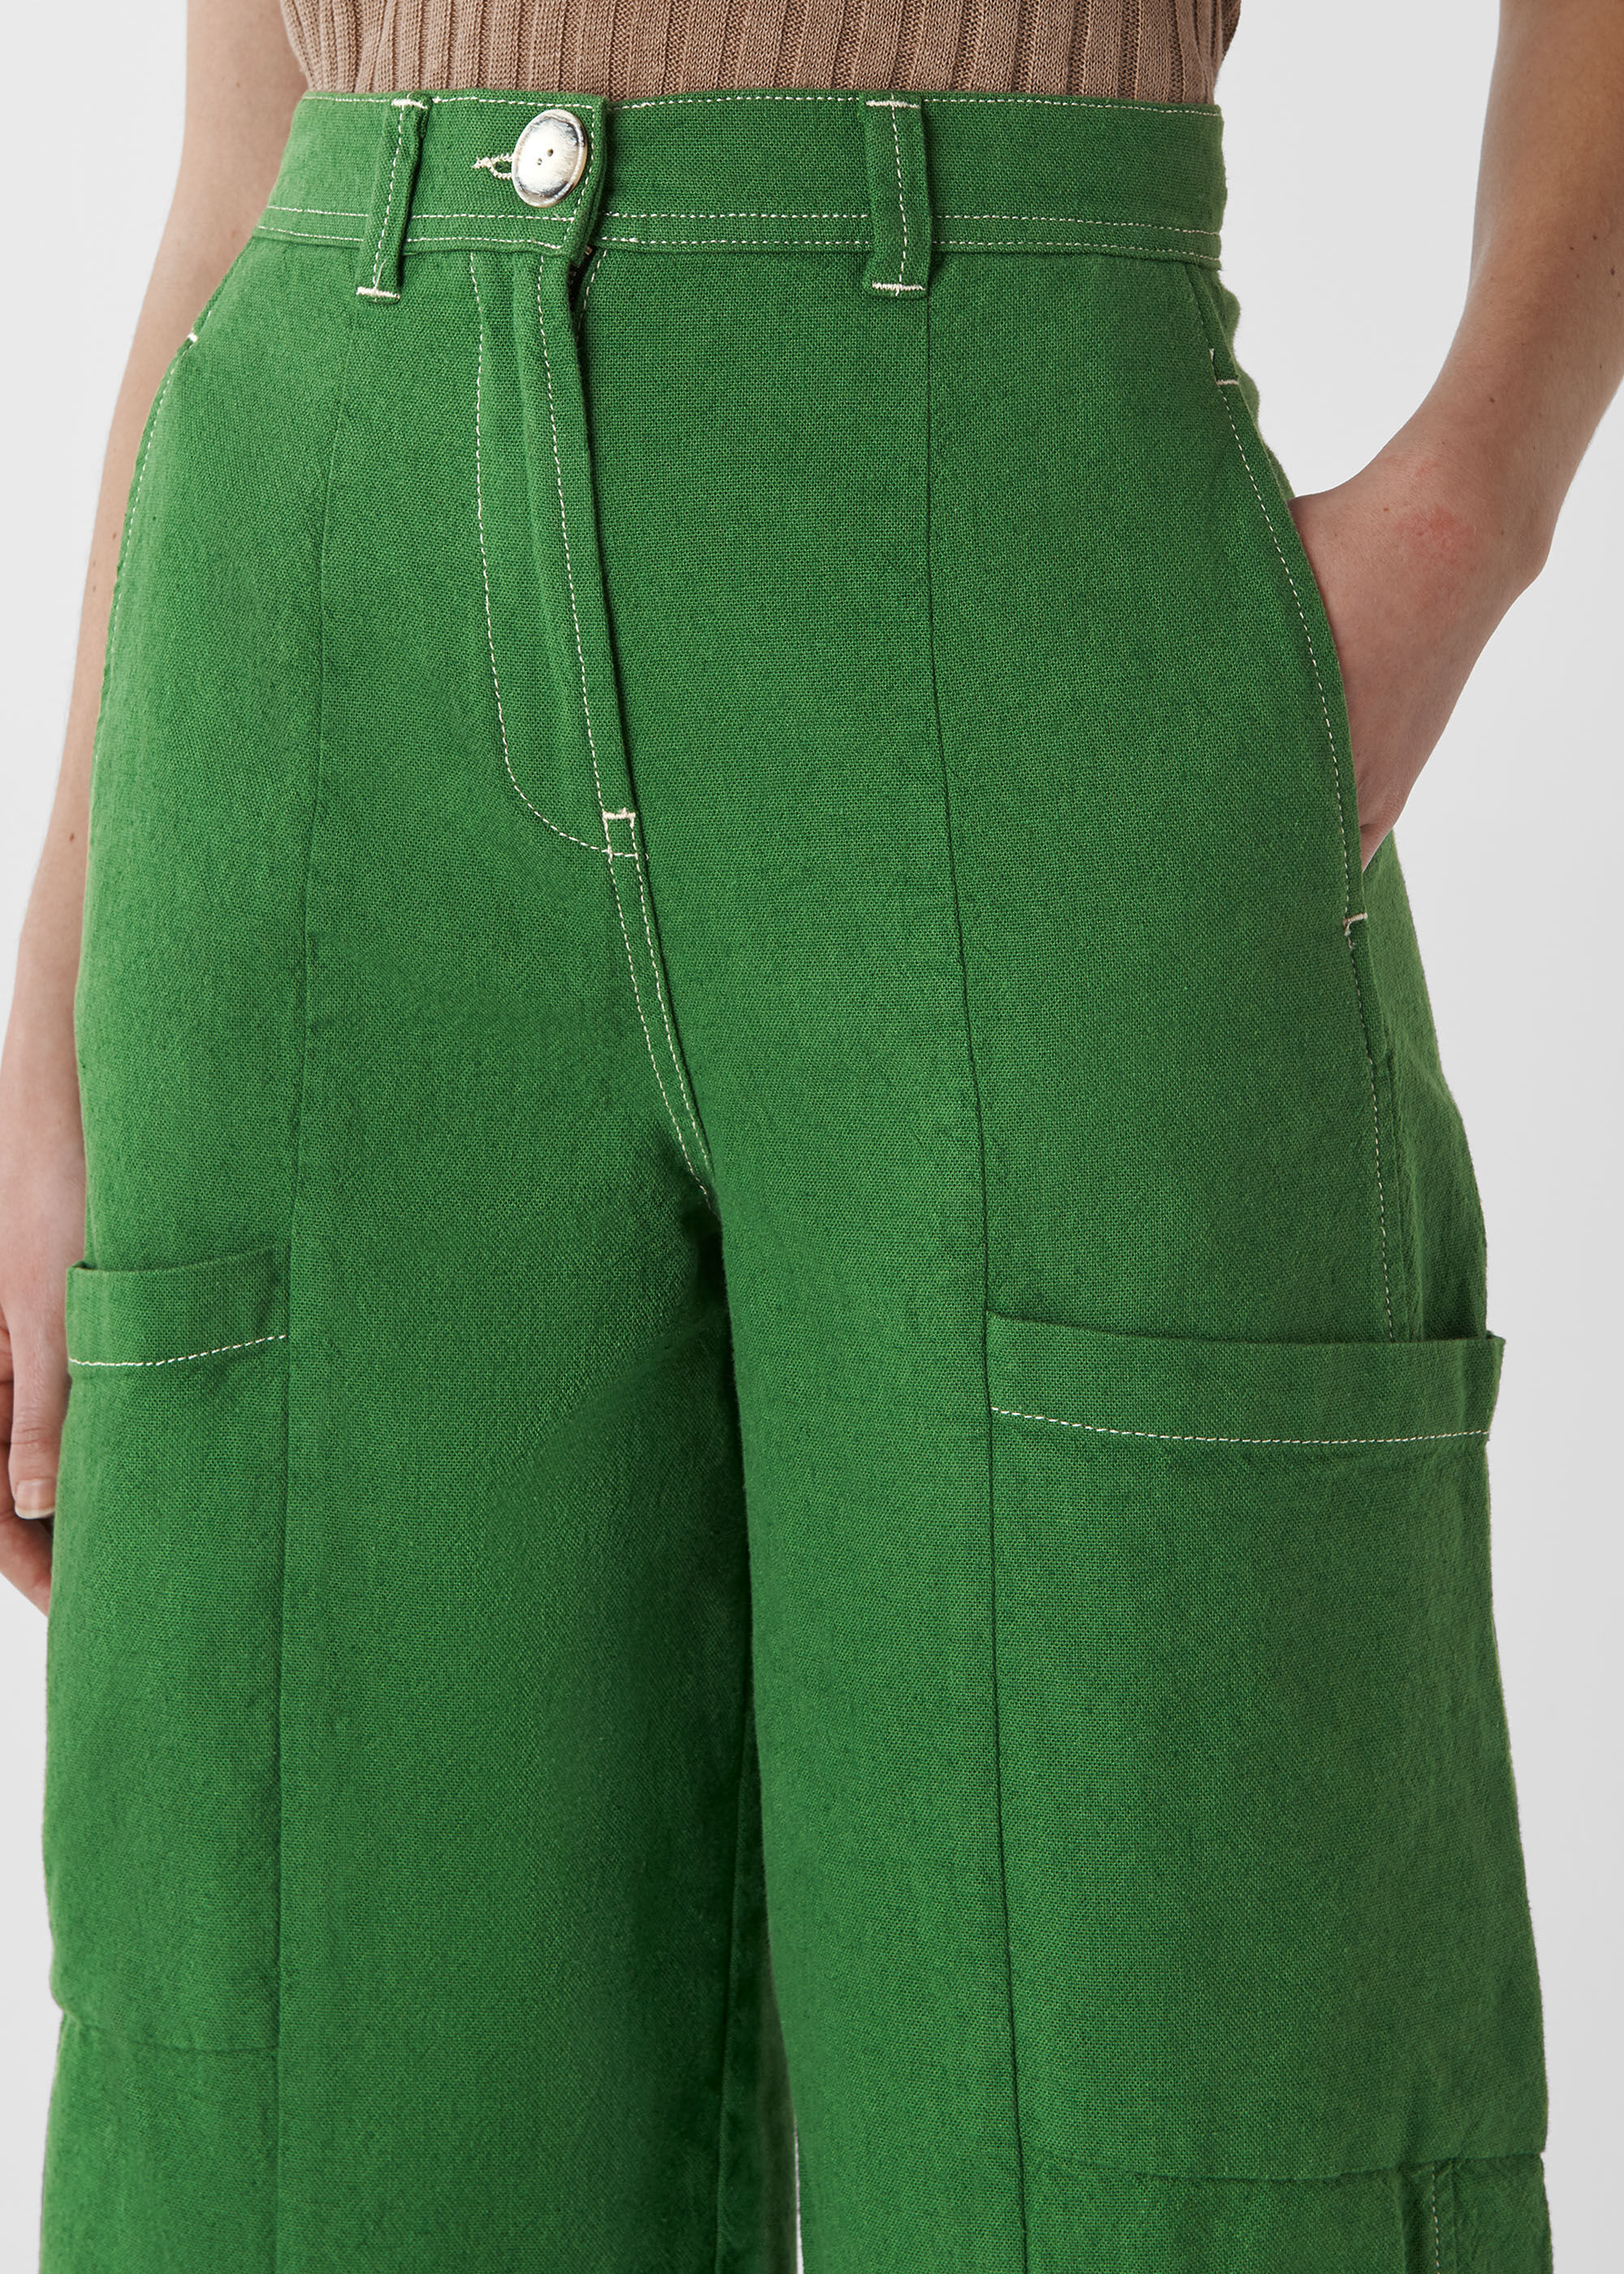 green utility trousers